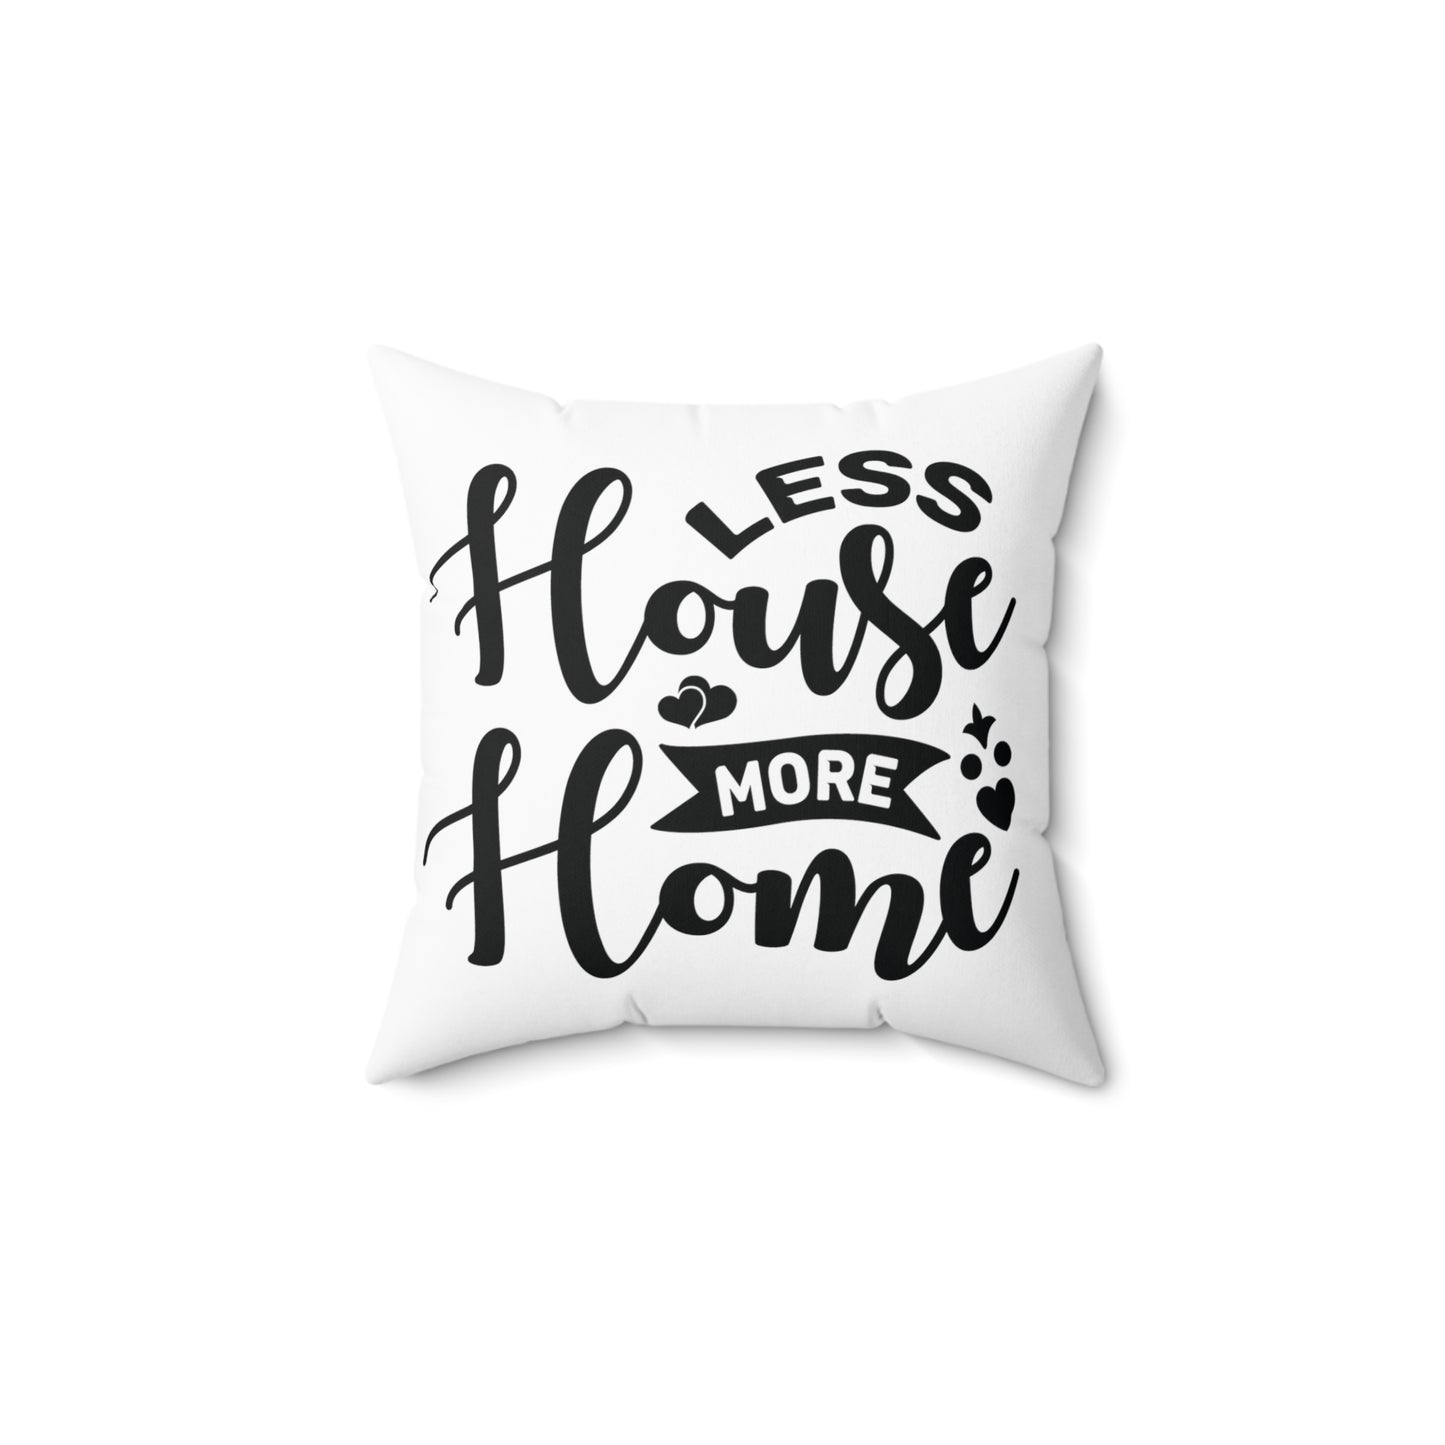 Less House More Home - Spun Polyester Square Pillow